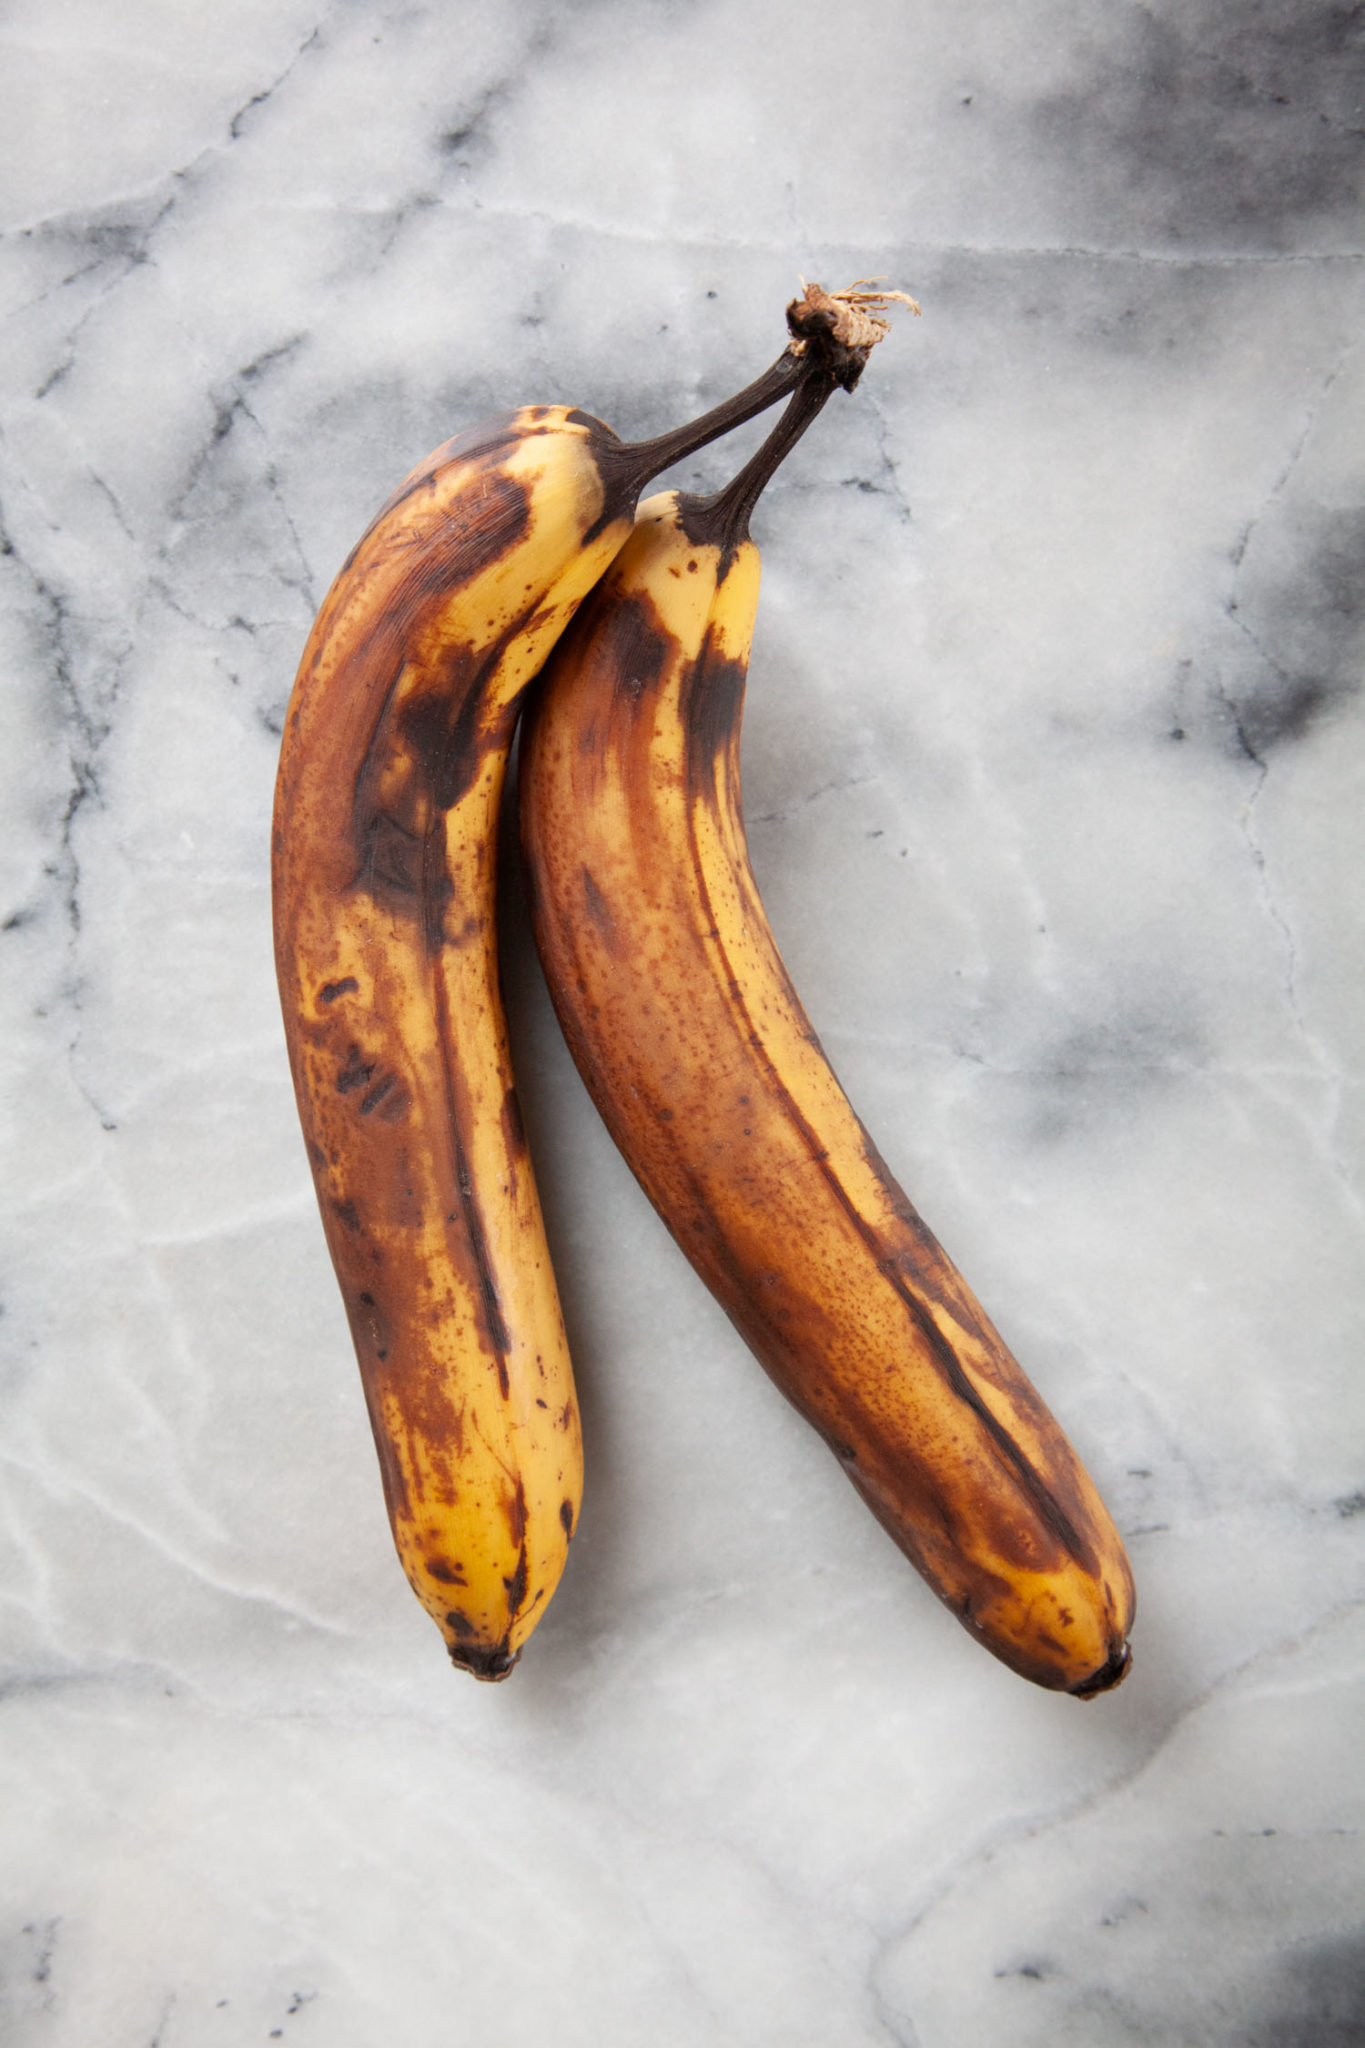 Two overly ripe bananas on a marble surface.